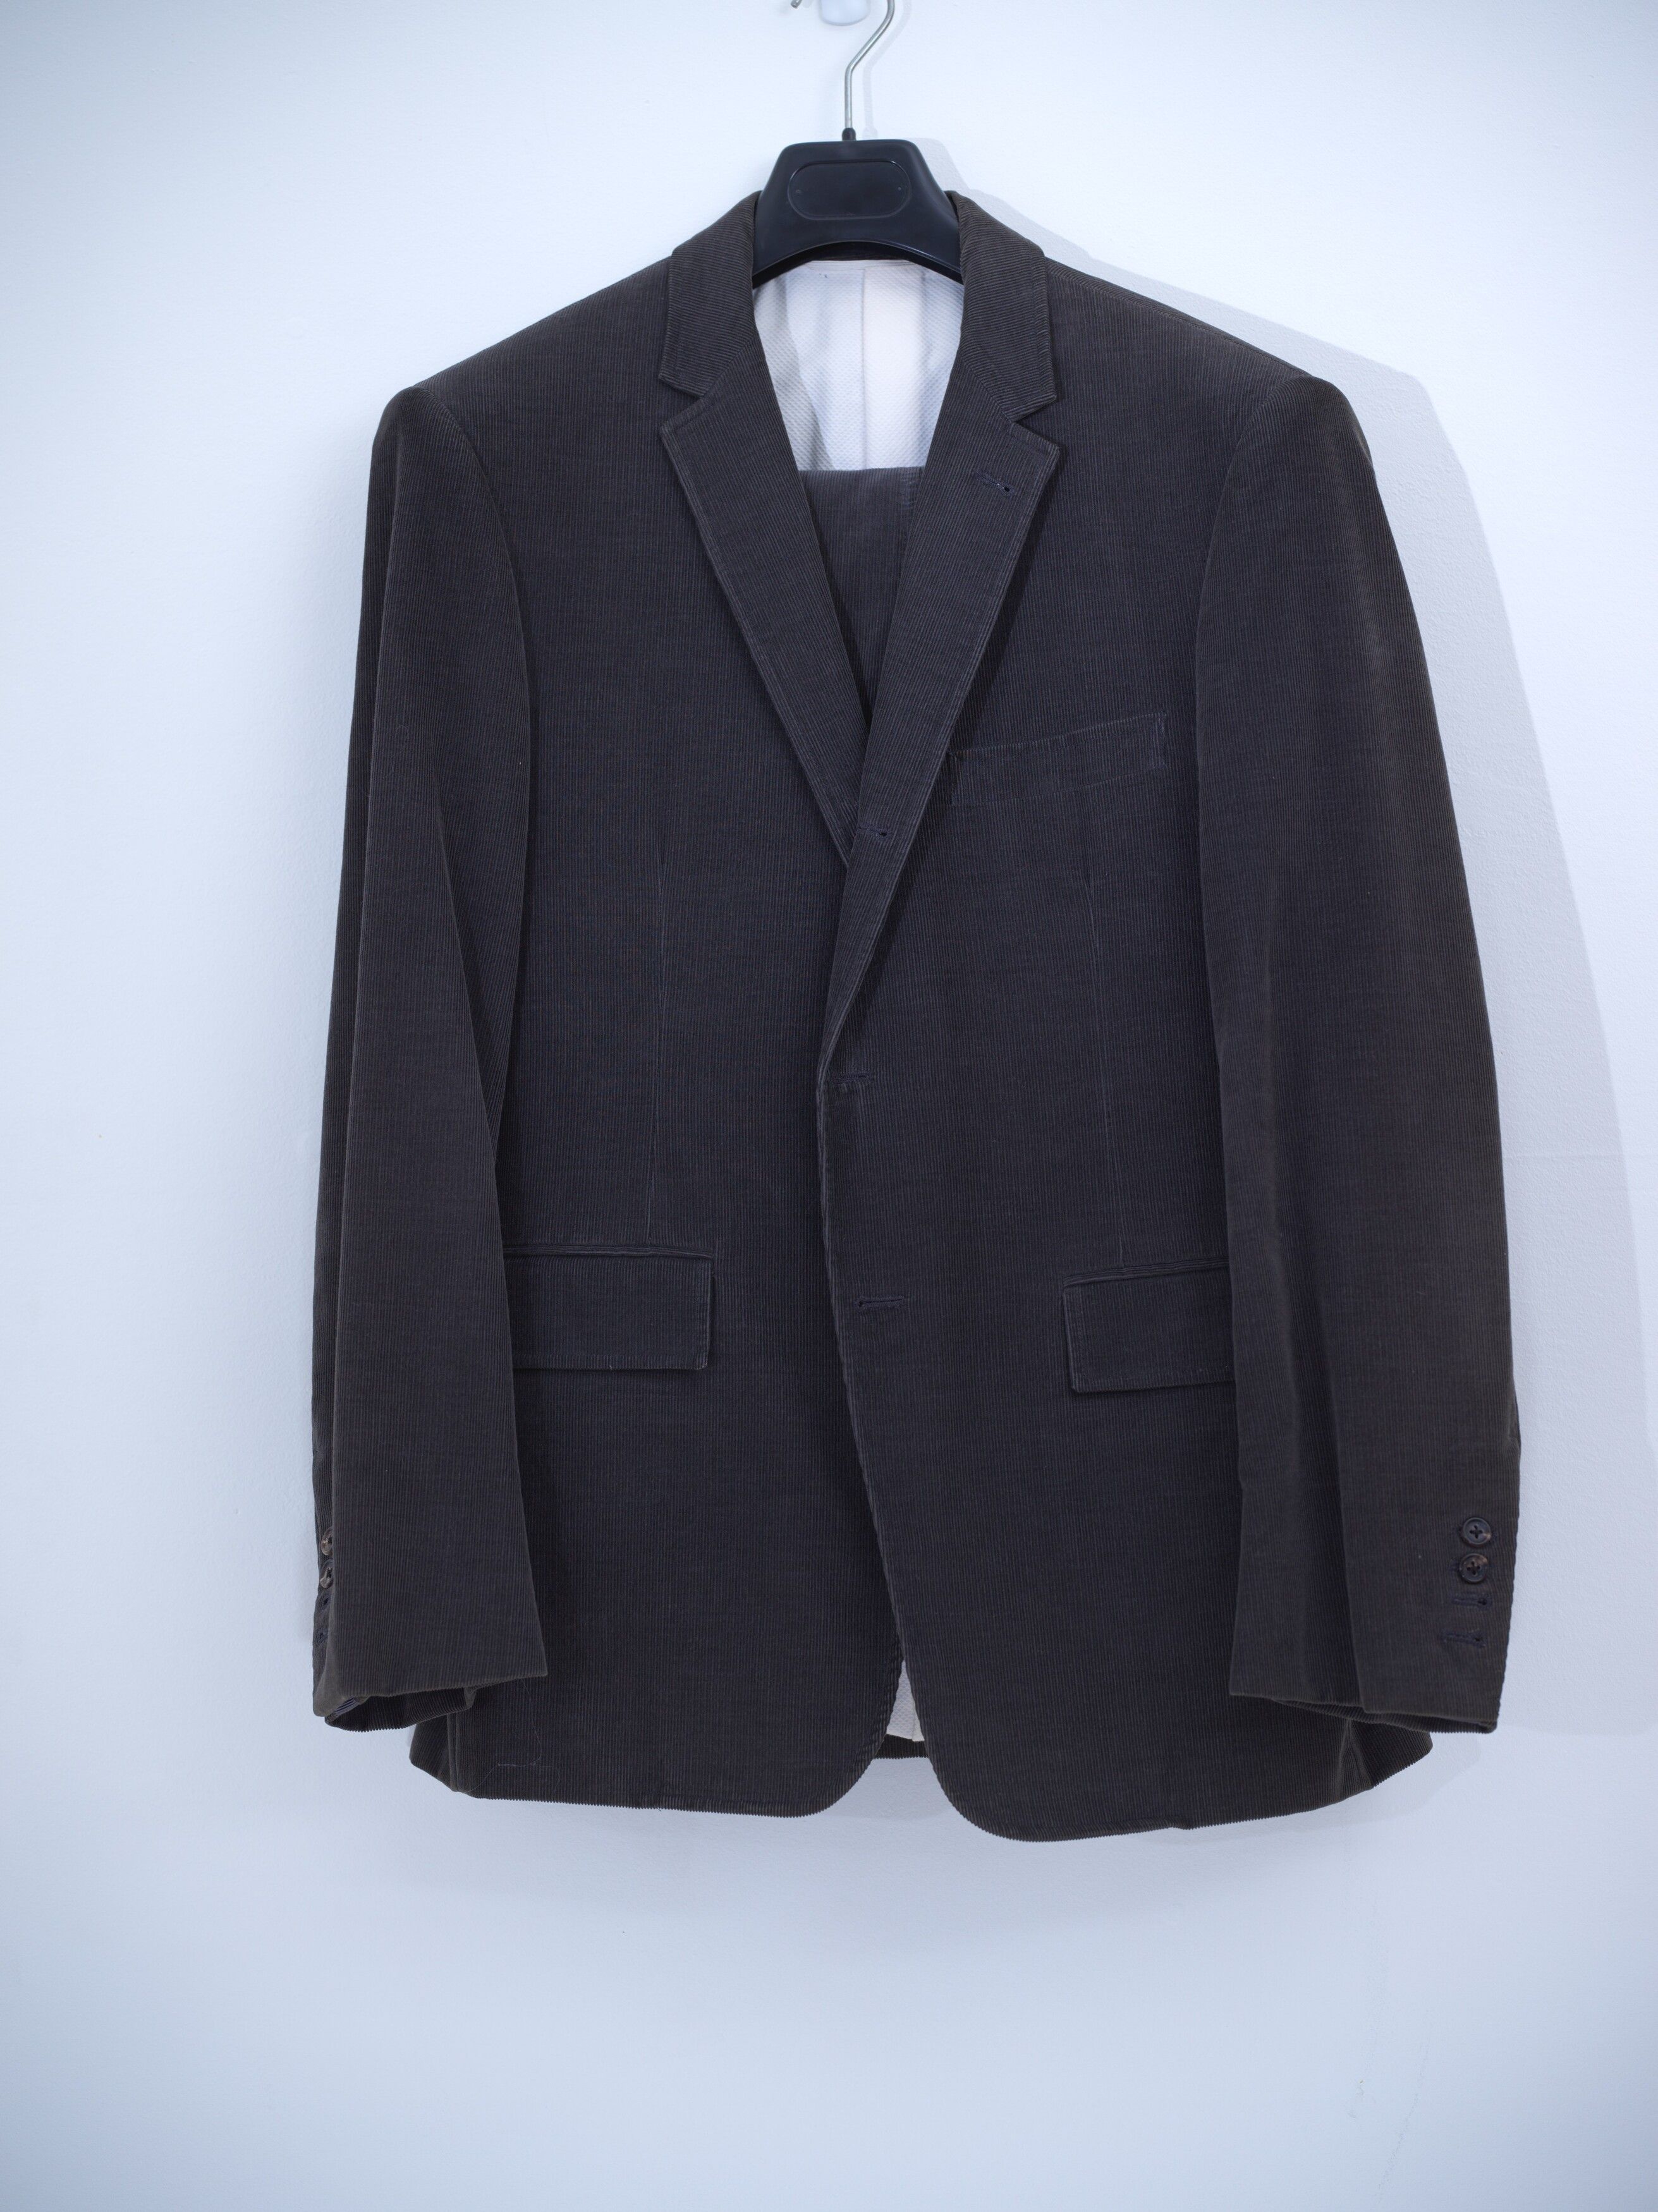 Thom Browne Navy Thin Corduroy Suit | Grailed